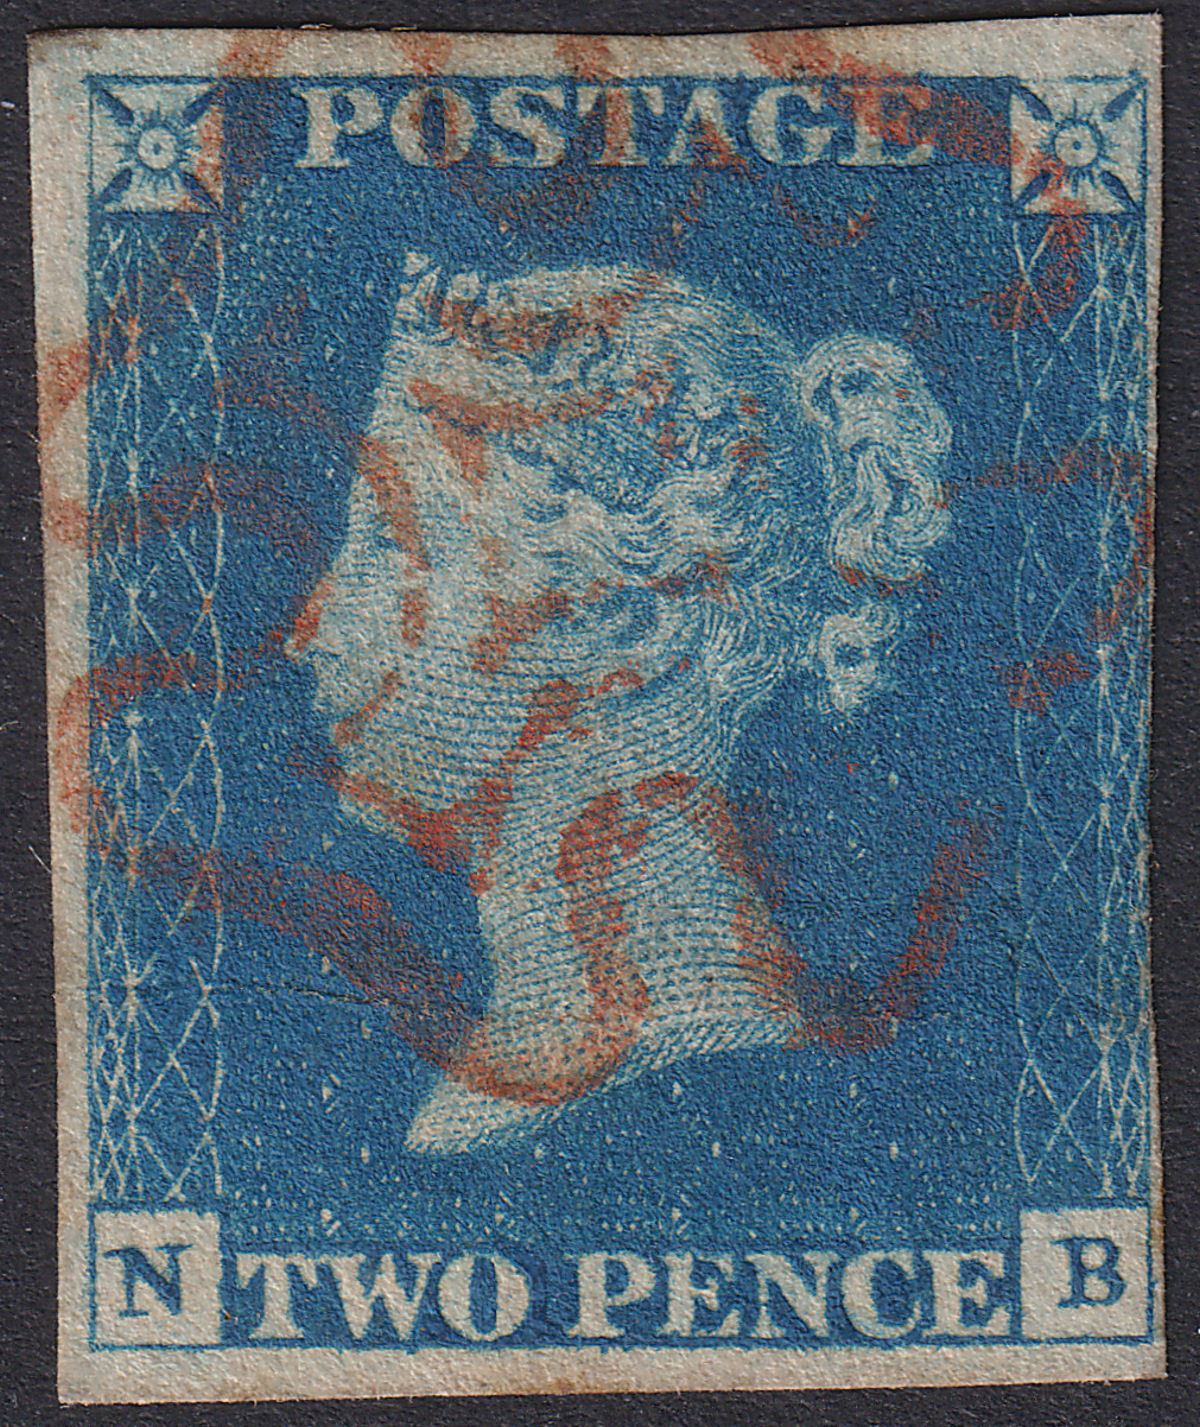 Queen Victoria 1840 2d Blue Used with Red MX SG5 cat £1250 3+ margins crease